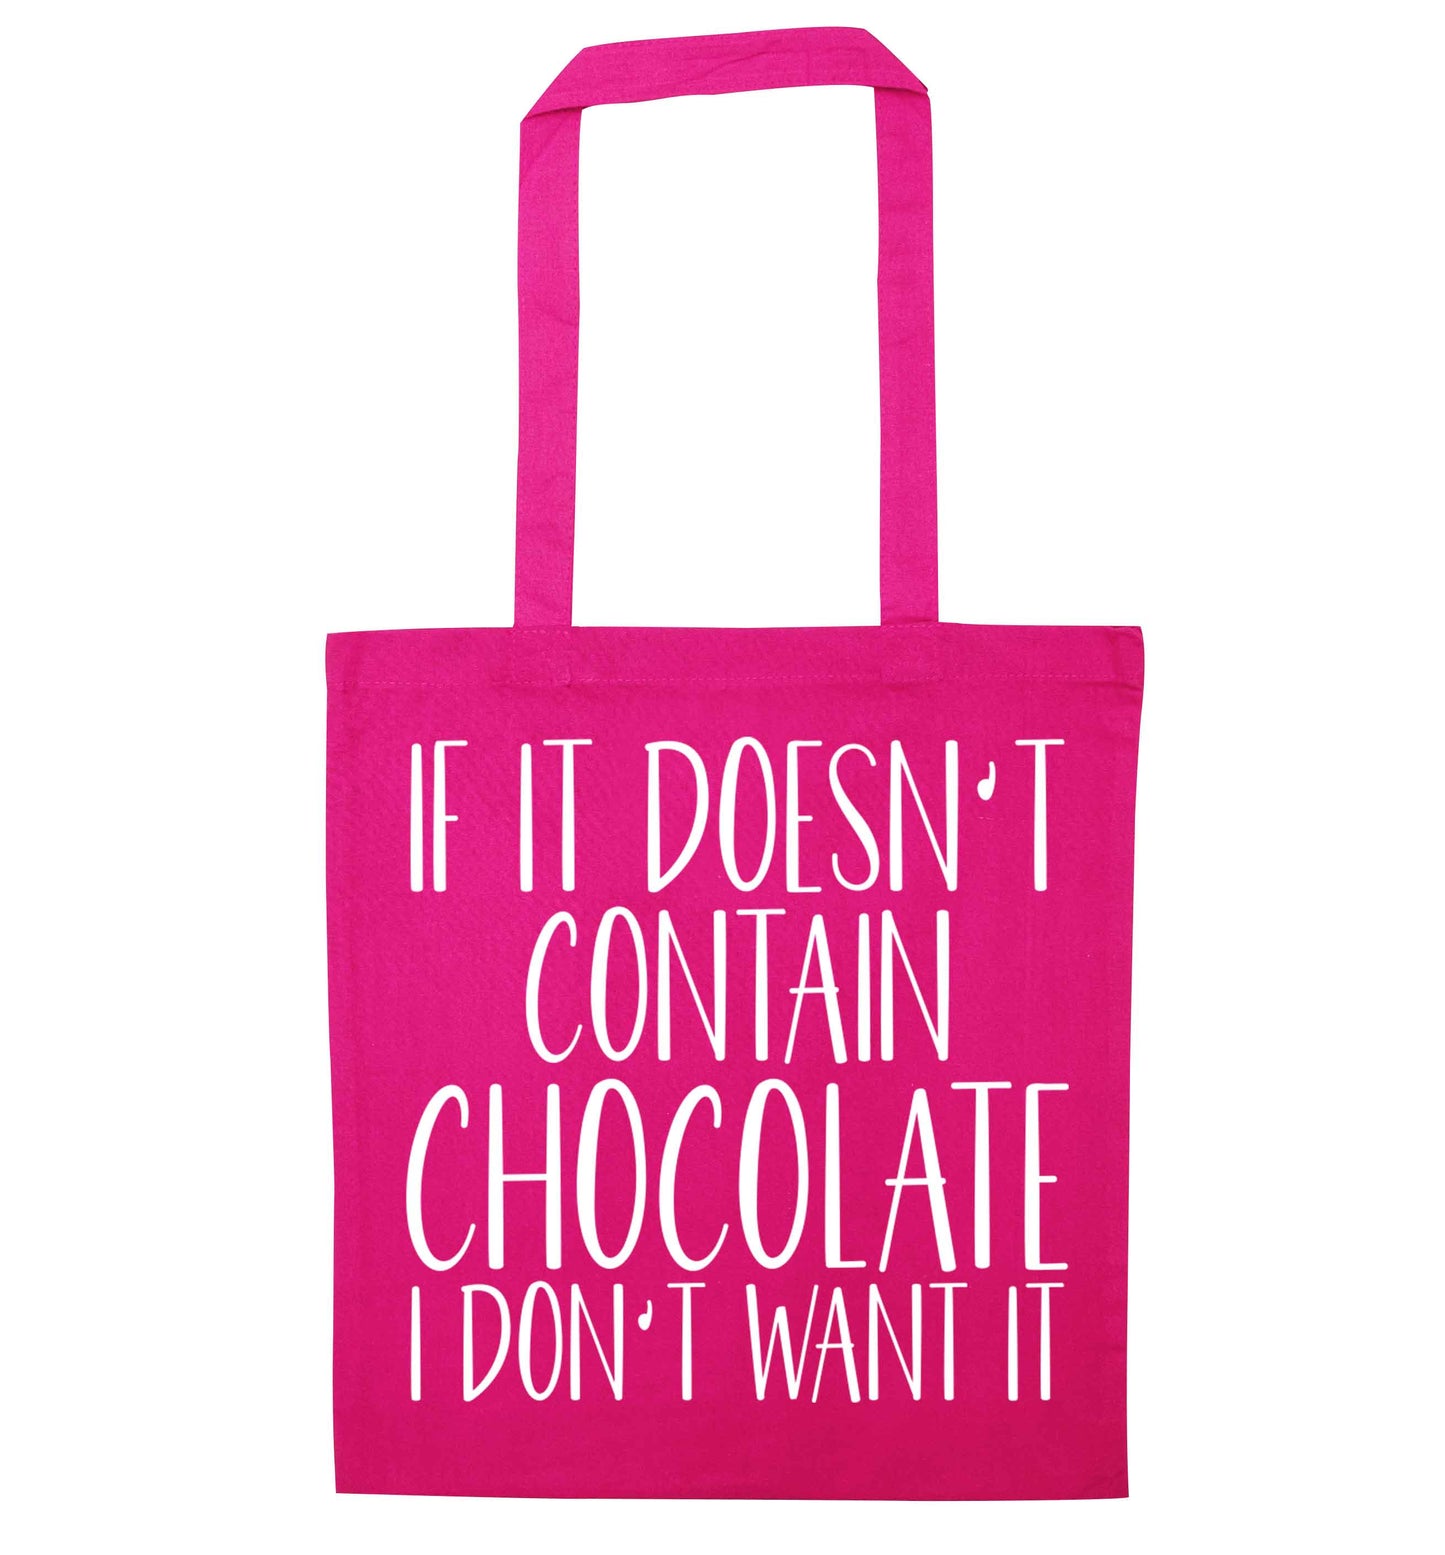 If it doesn't contain chocolate I don't want it pink tote bag